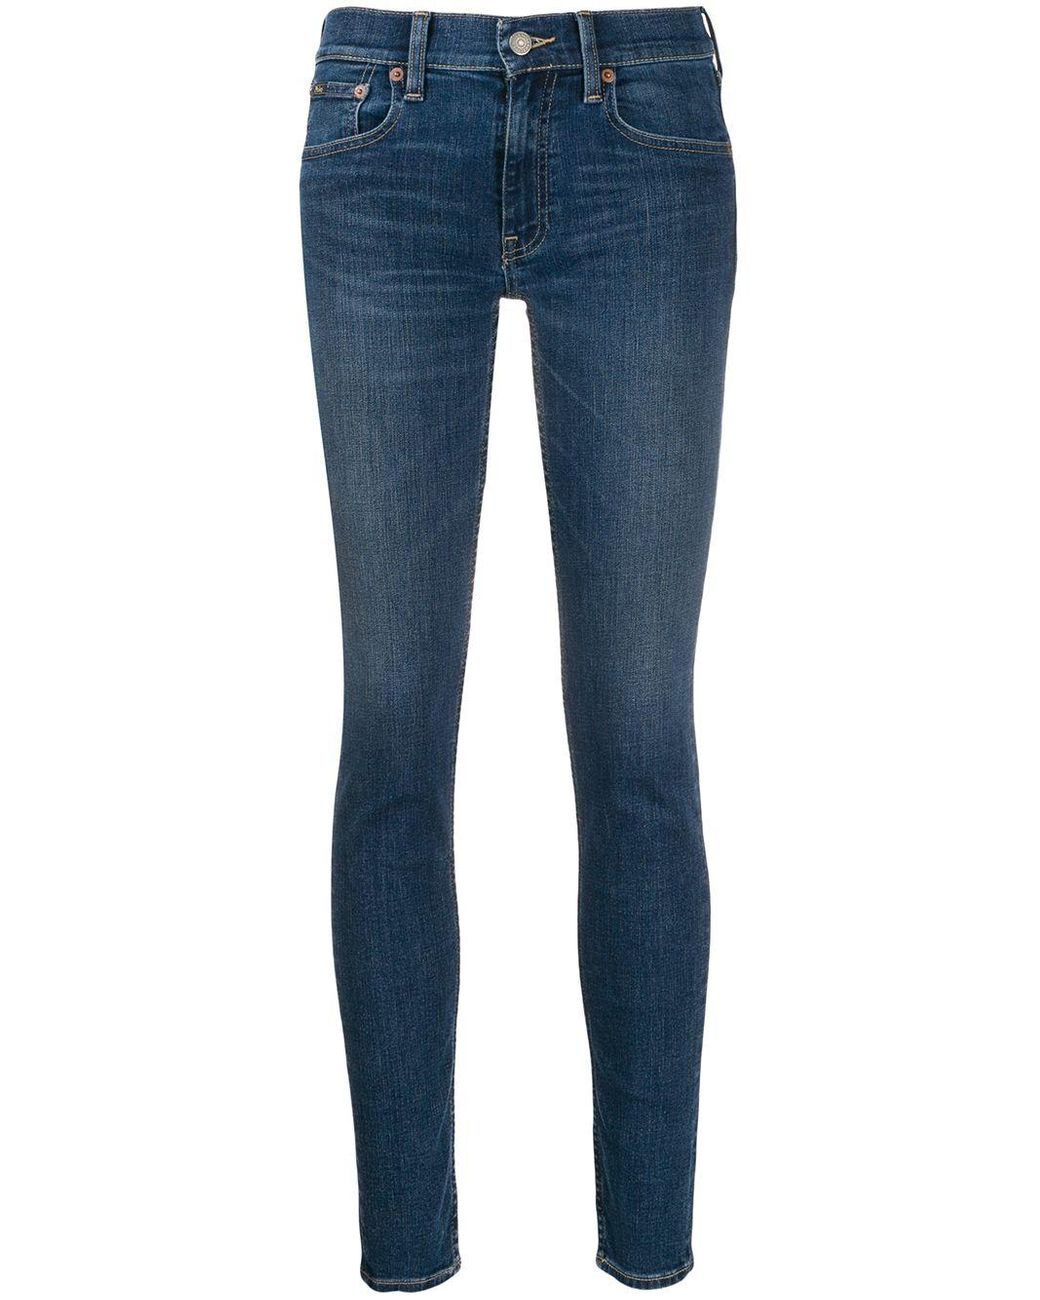 Polo Ralph Lauren Stretch Cotton Mid-rise Skinny Jeans in Blue - Lyst